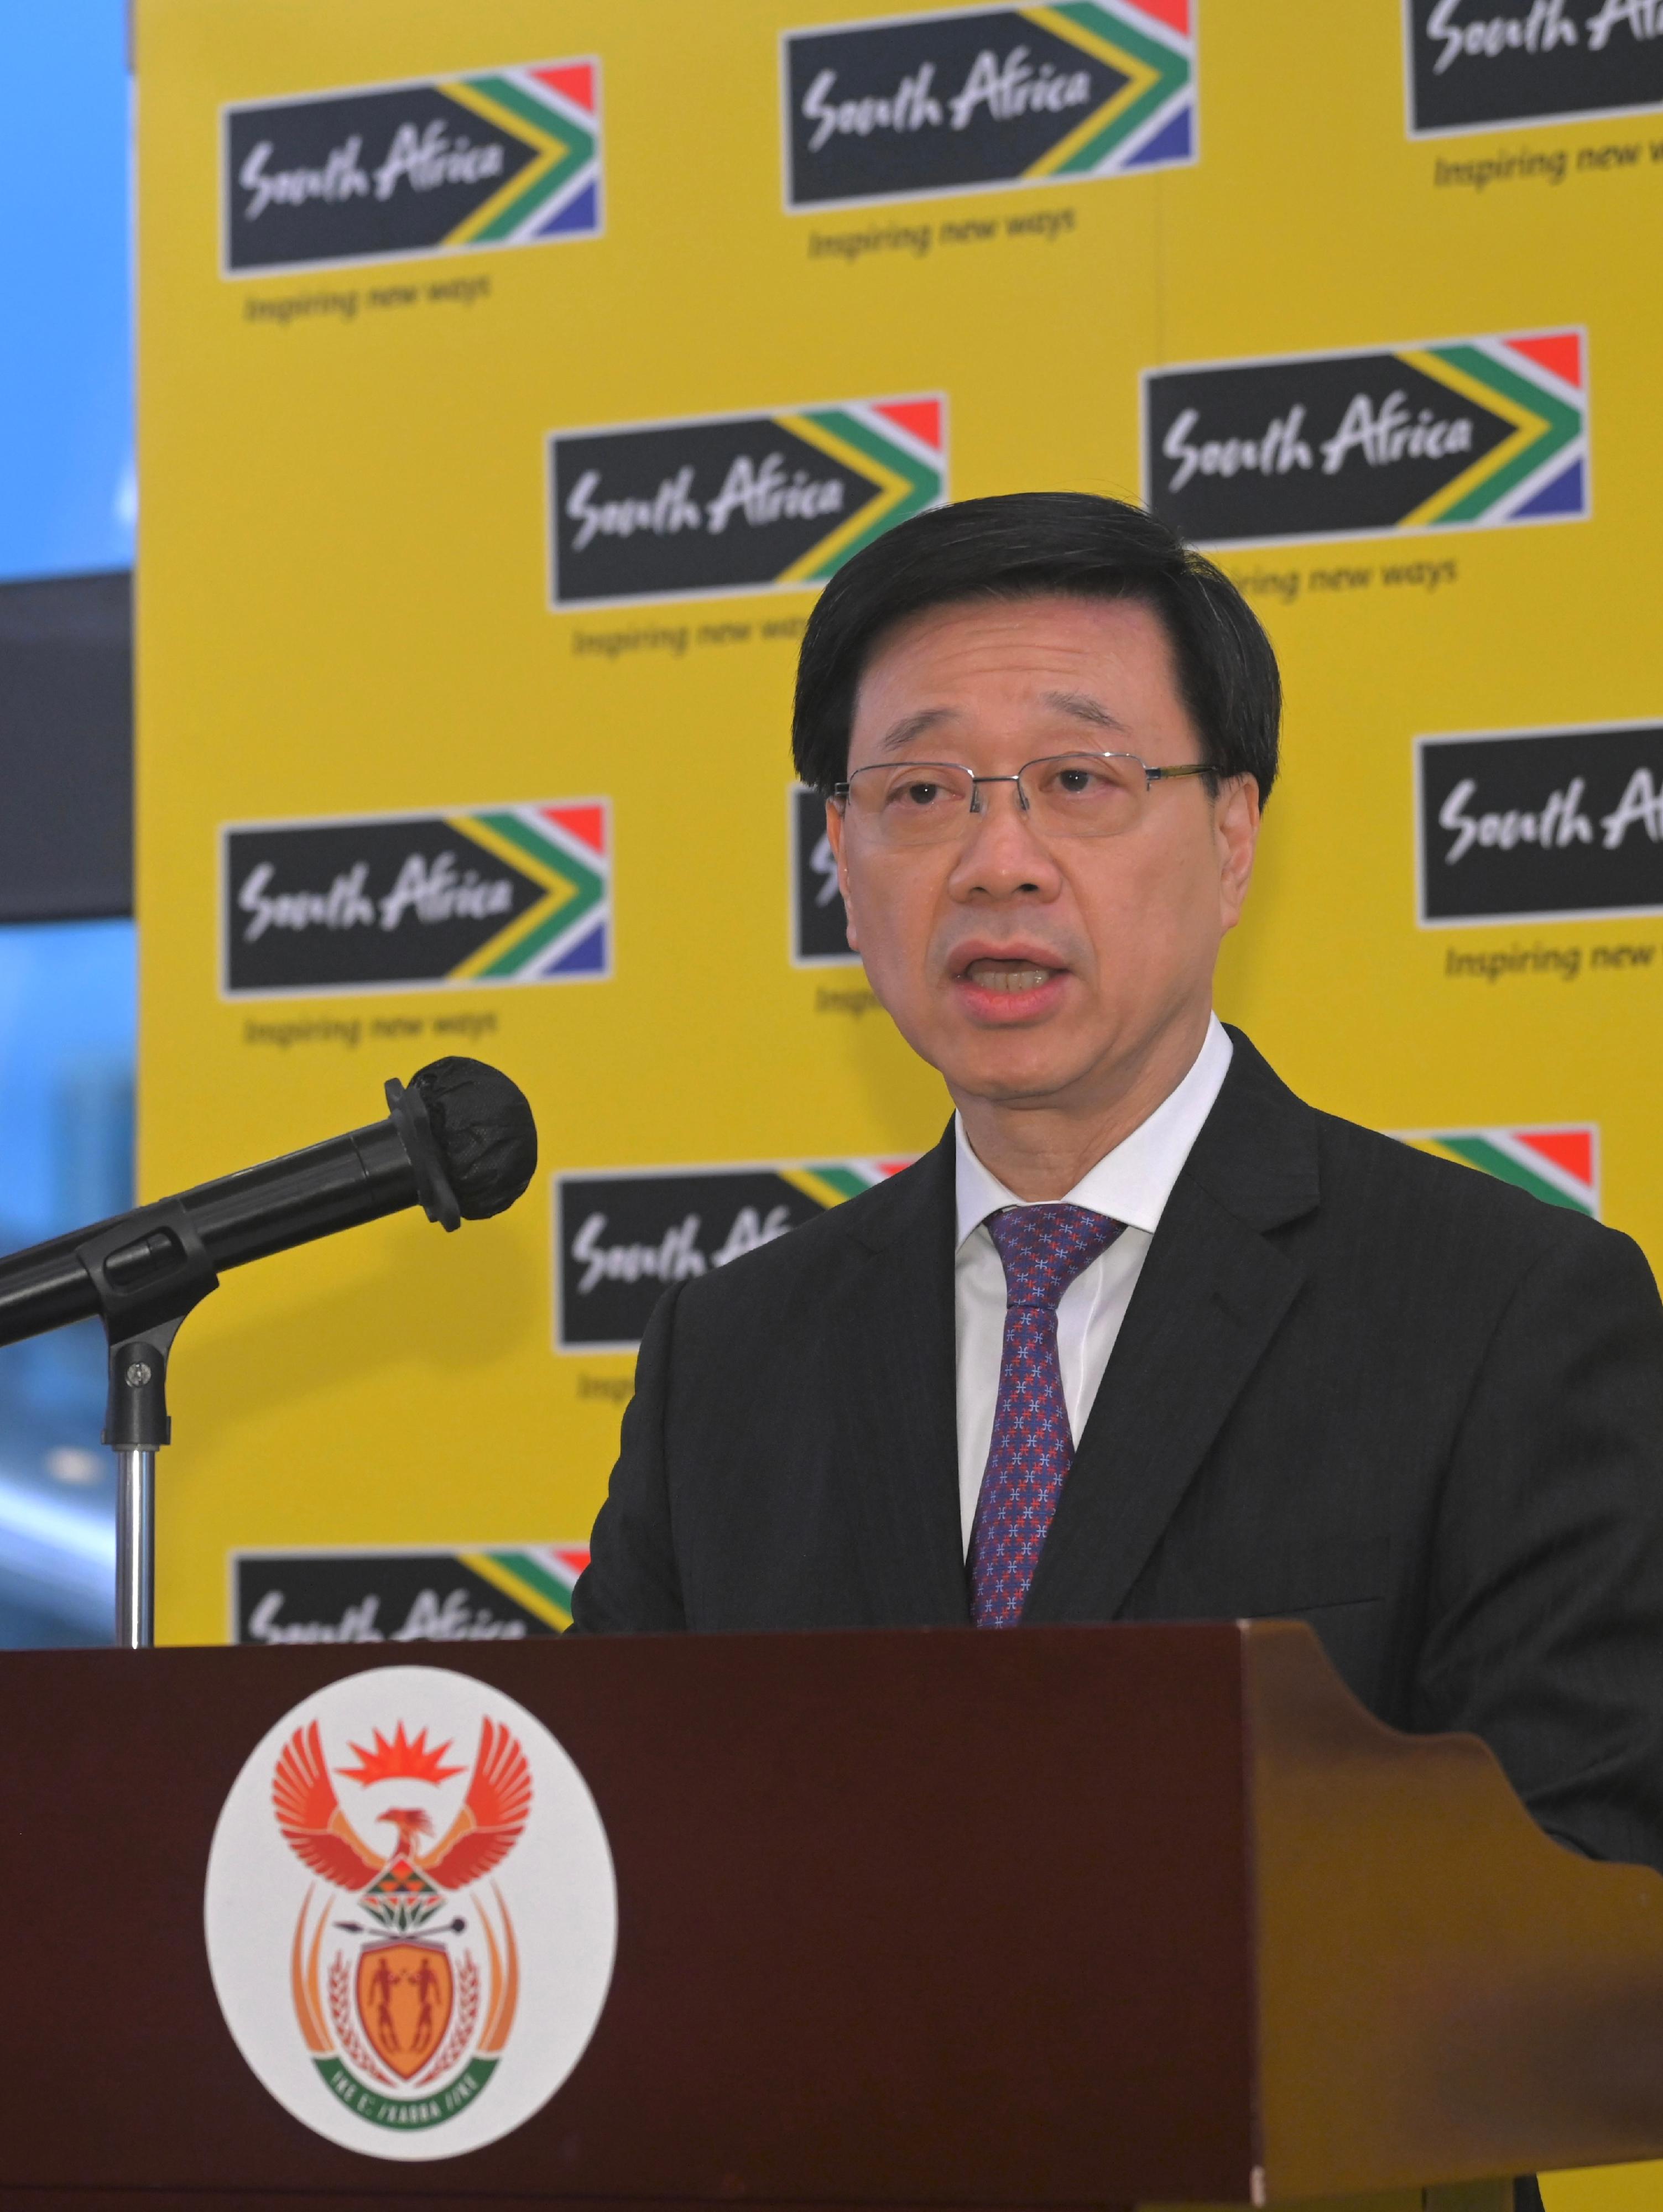 The Chief Executive, Mr John Lee, speaks at the South African National Day Cocktail today (April 25).